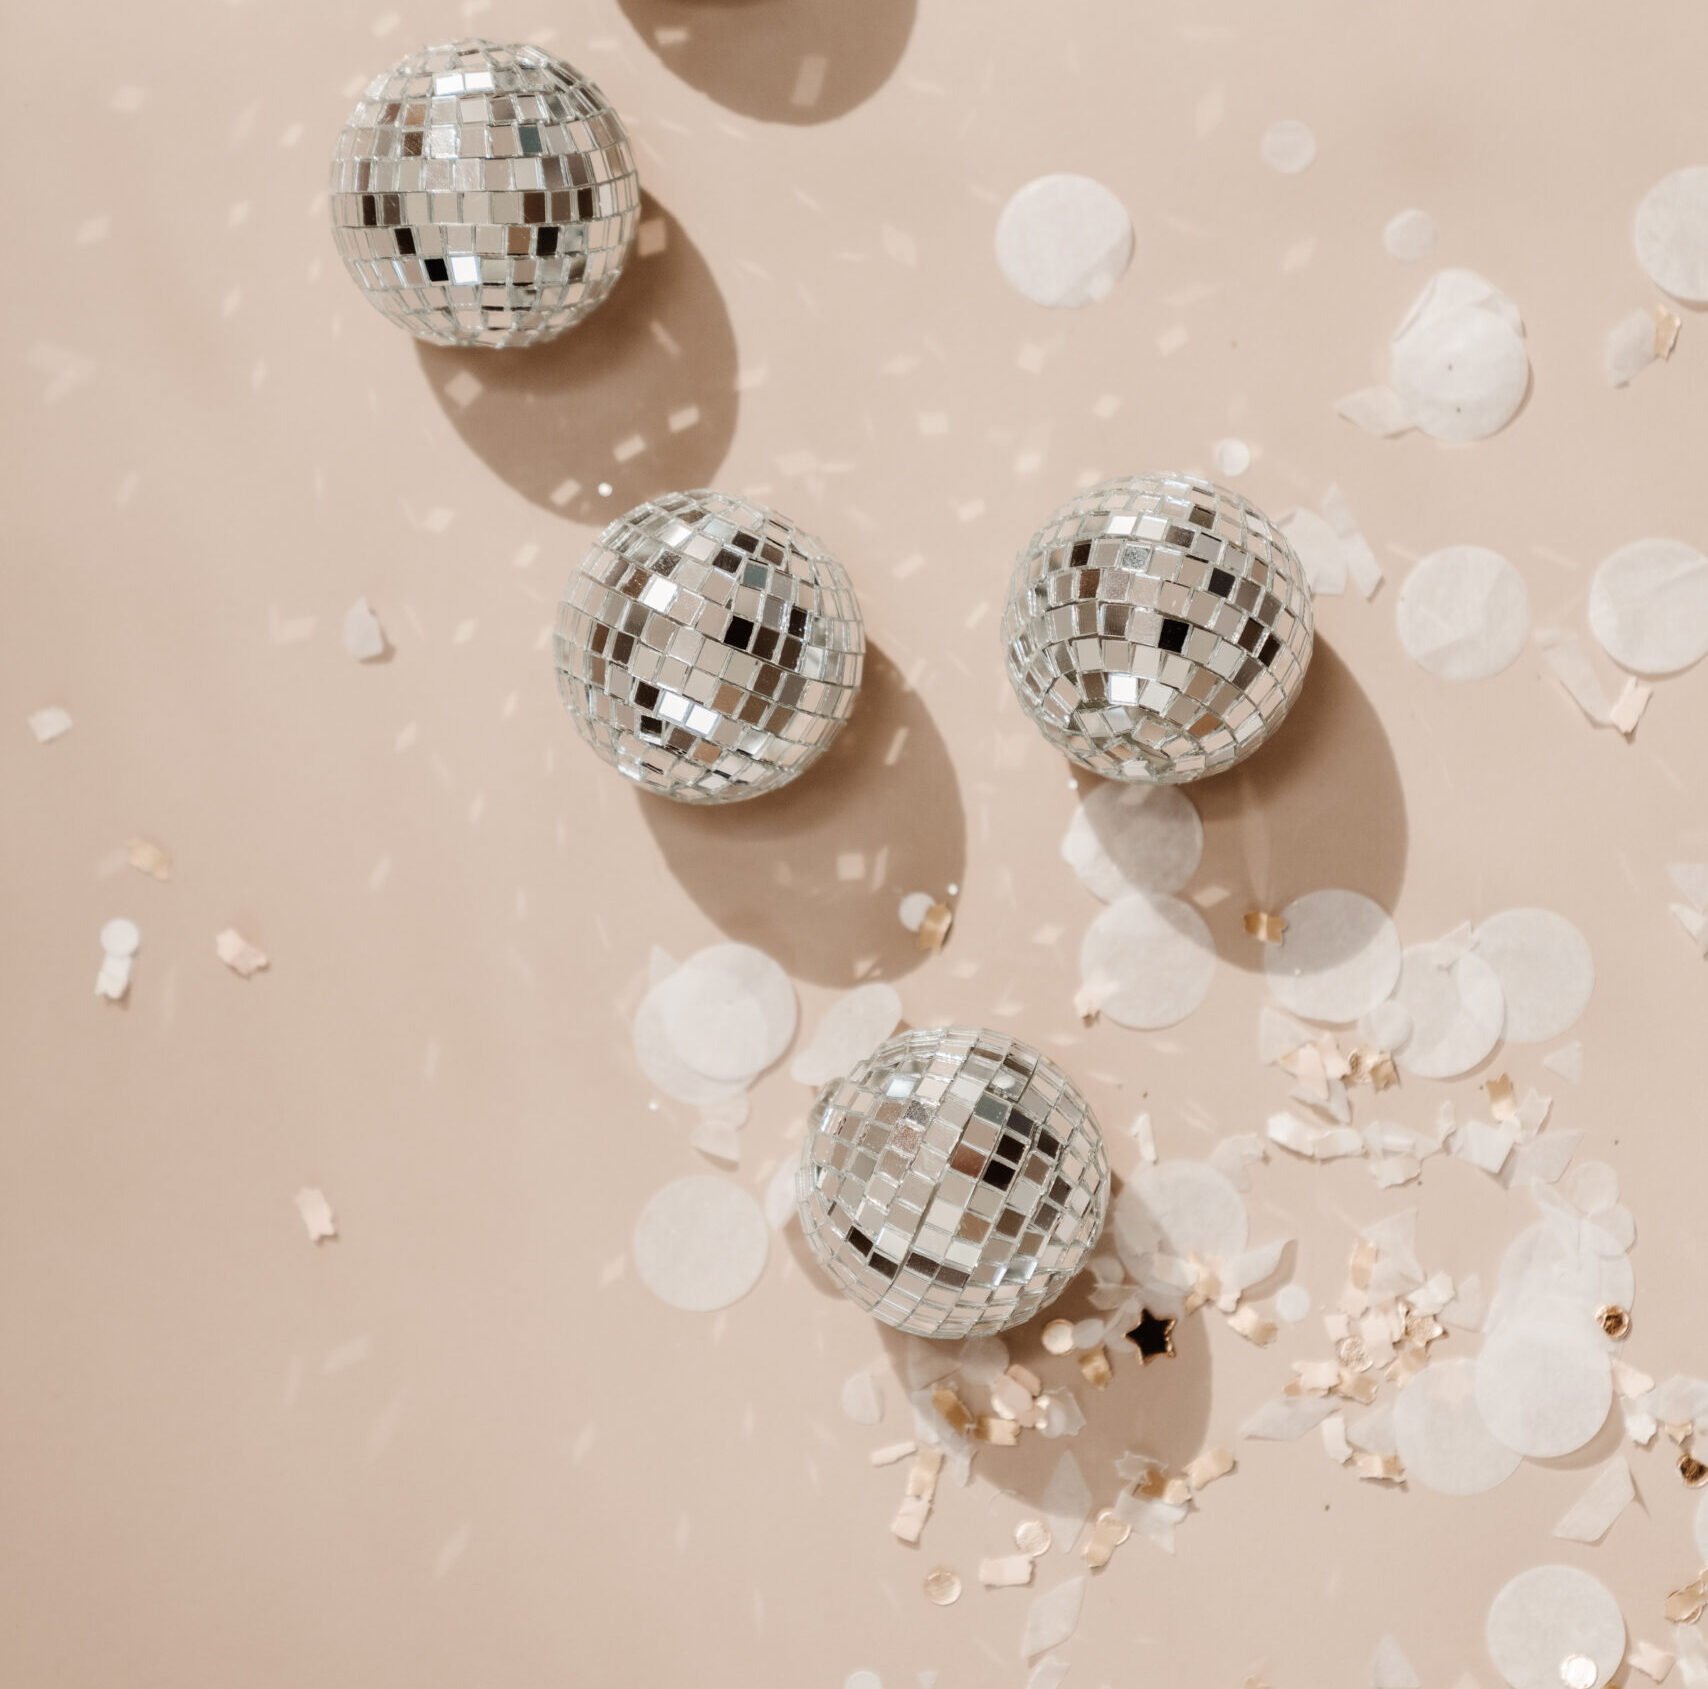 Stock image by Haute Stock featuring mini disco balls flatlay with confetti on taupe background